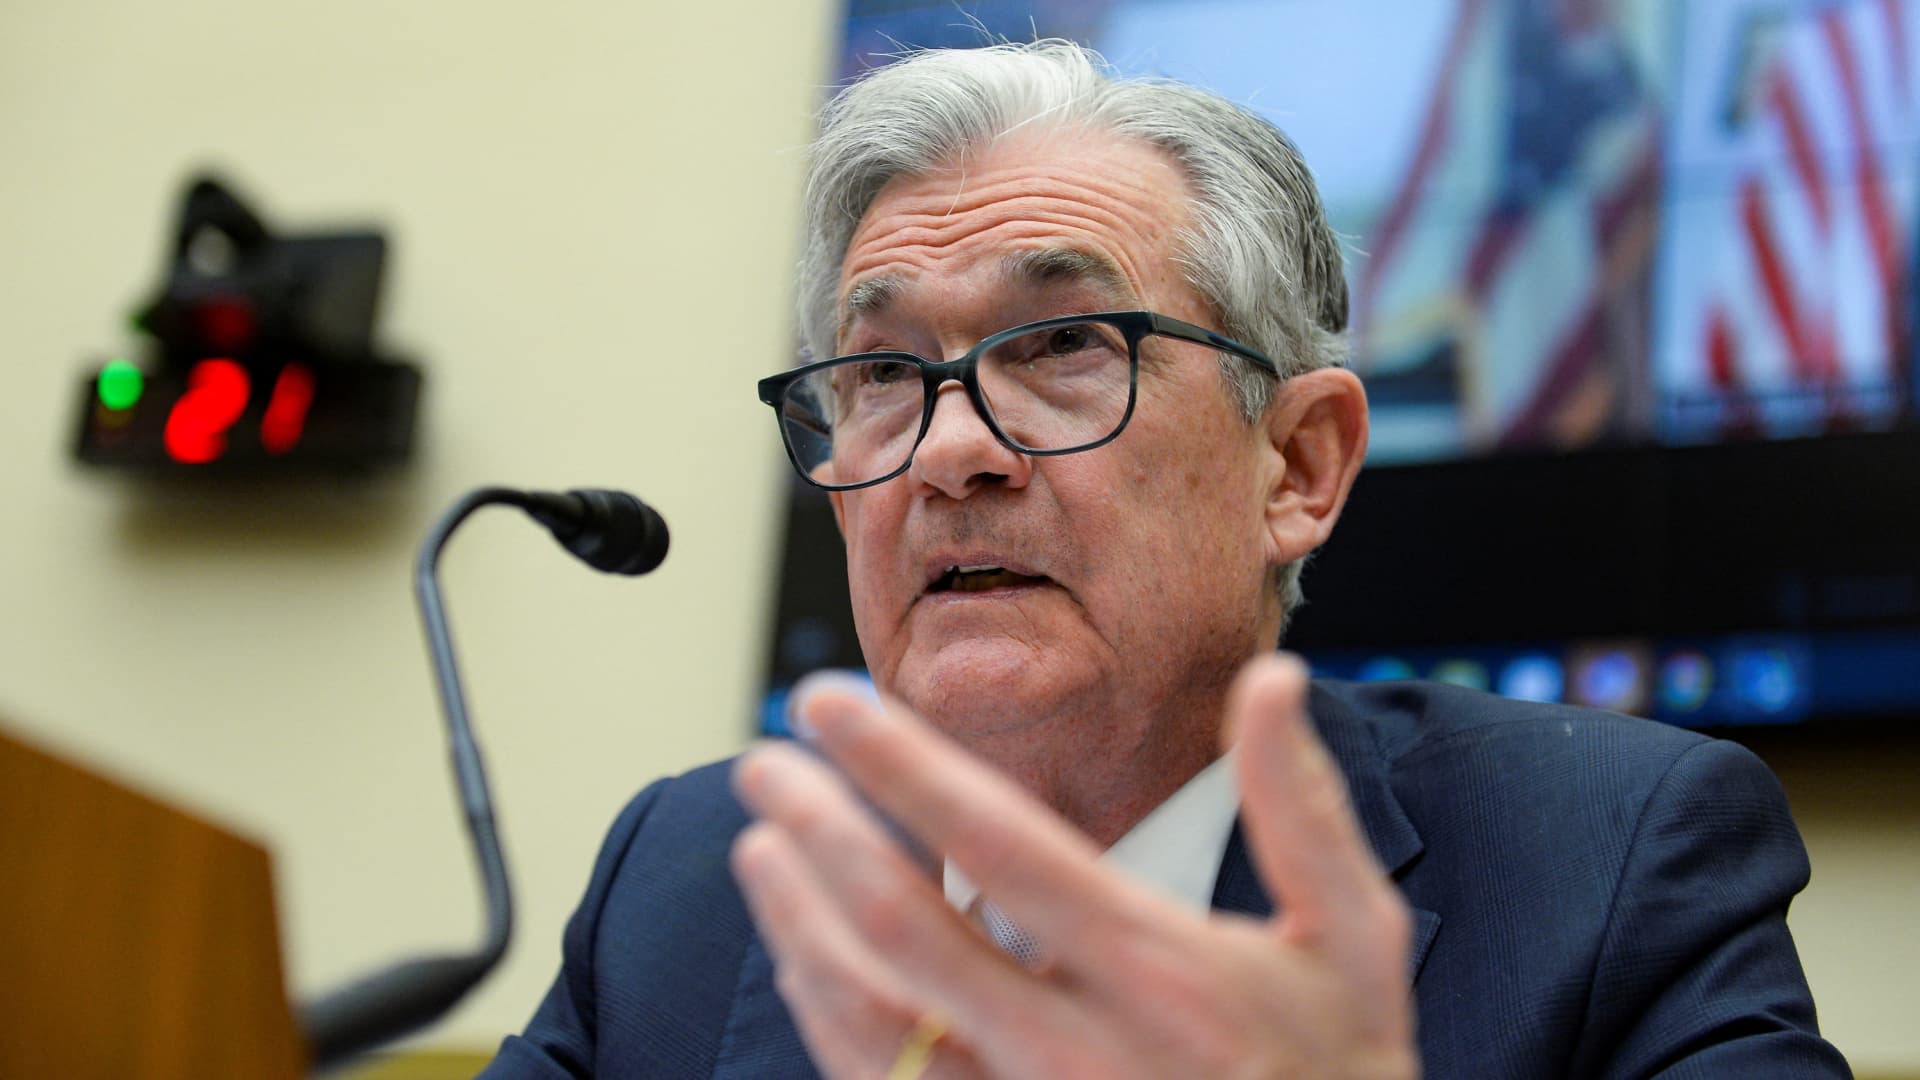 Raising interest rates is the wrong solution to the inflation problem, analyst s..